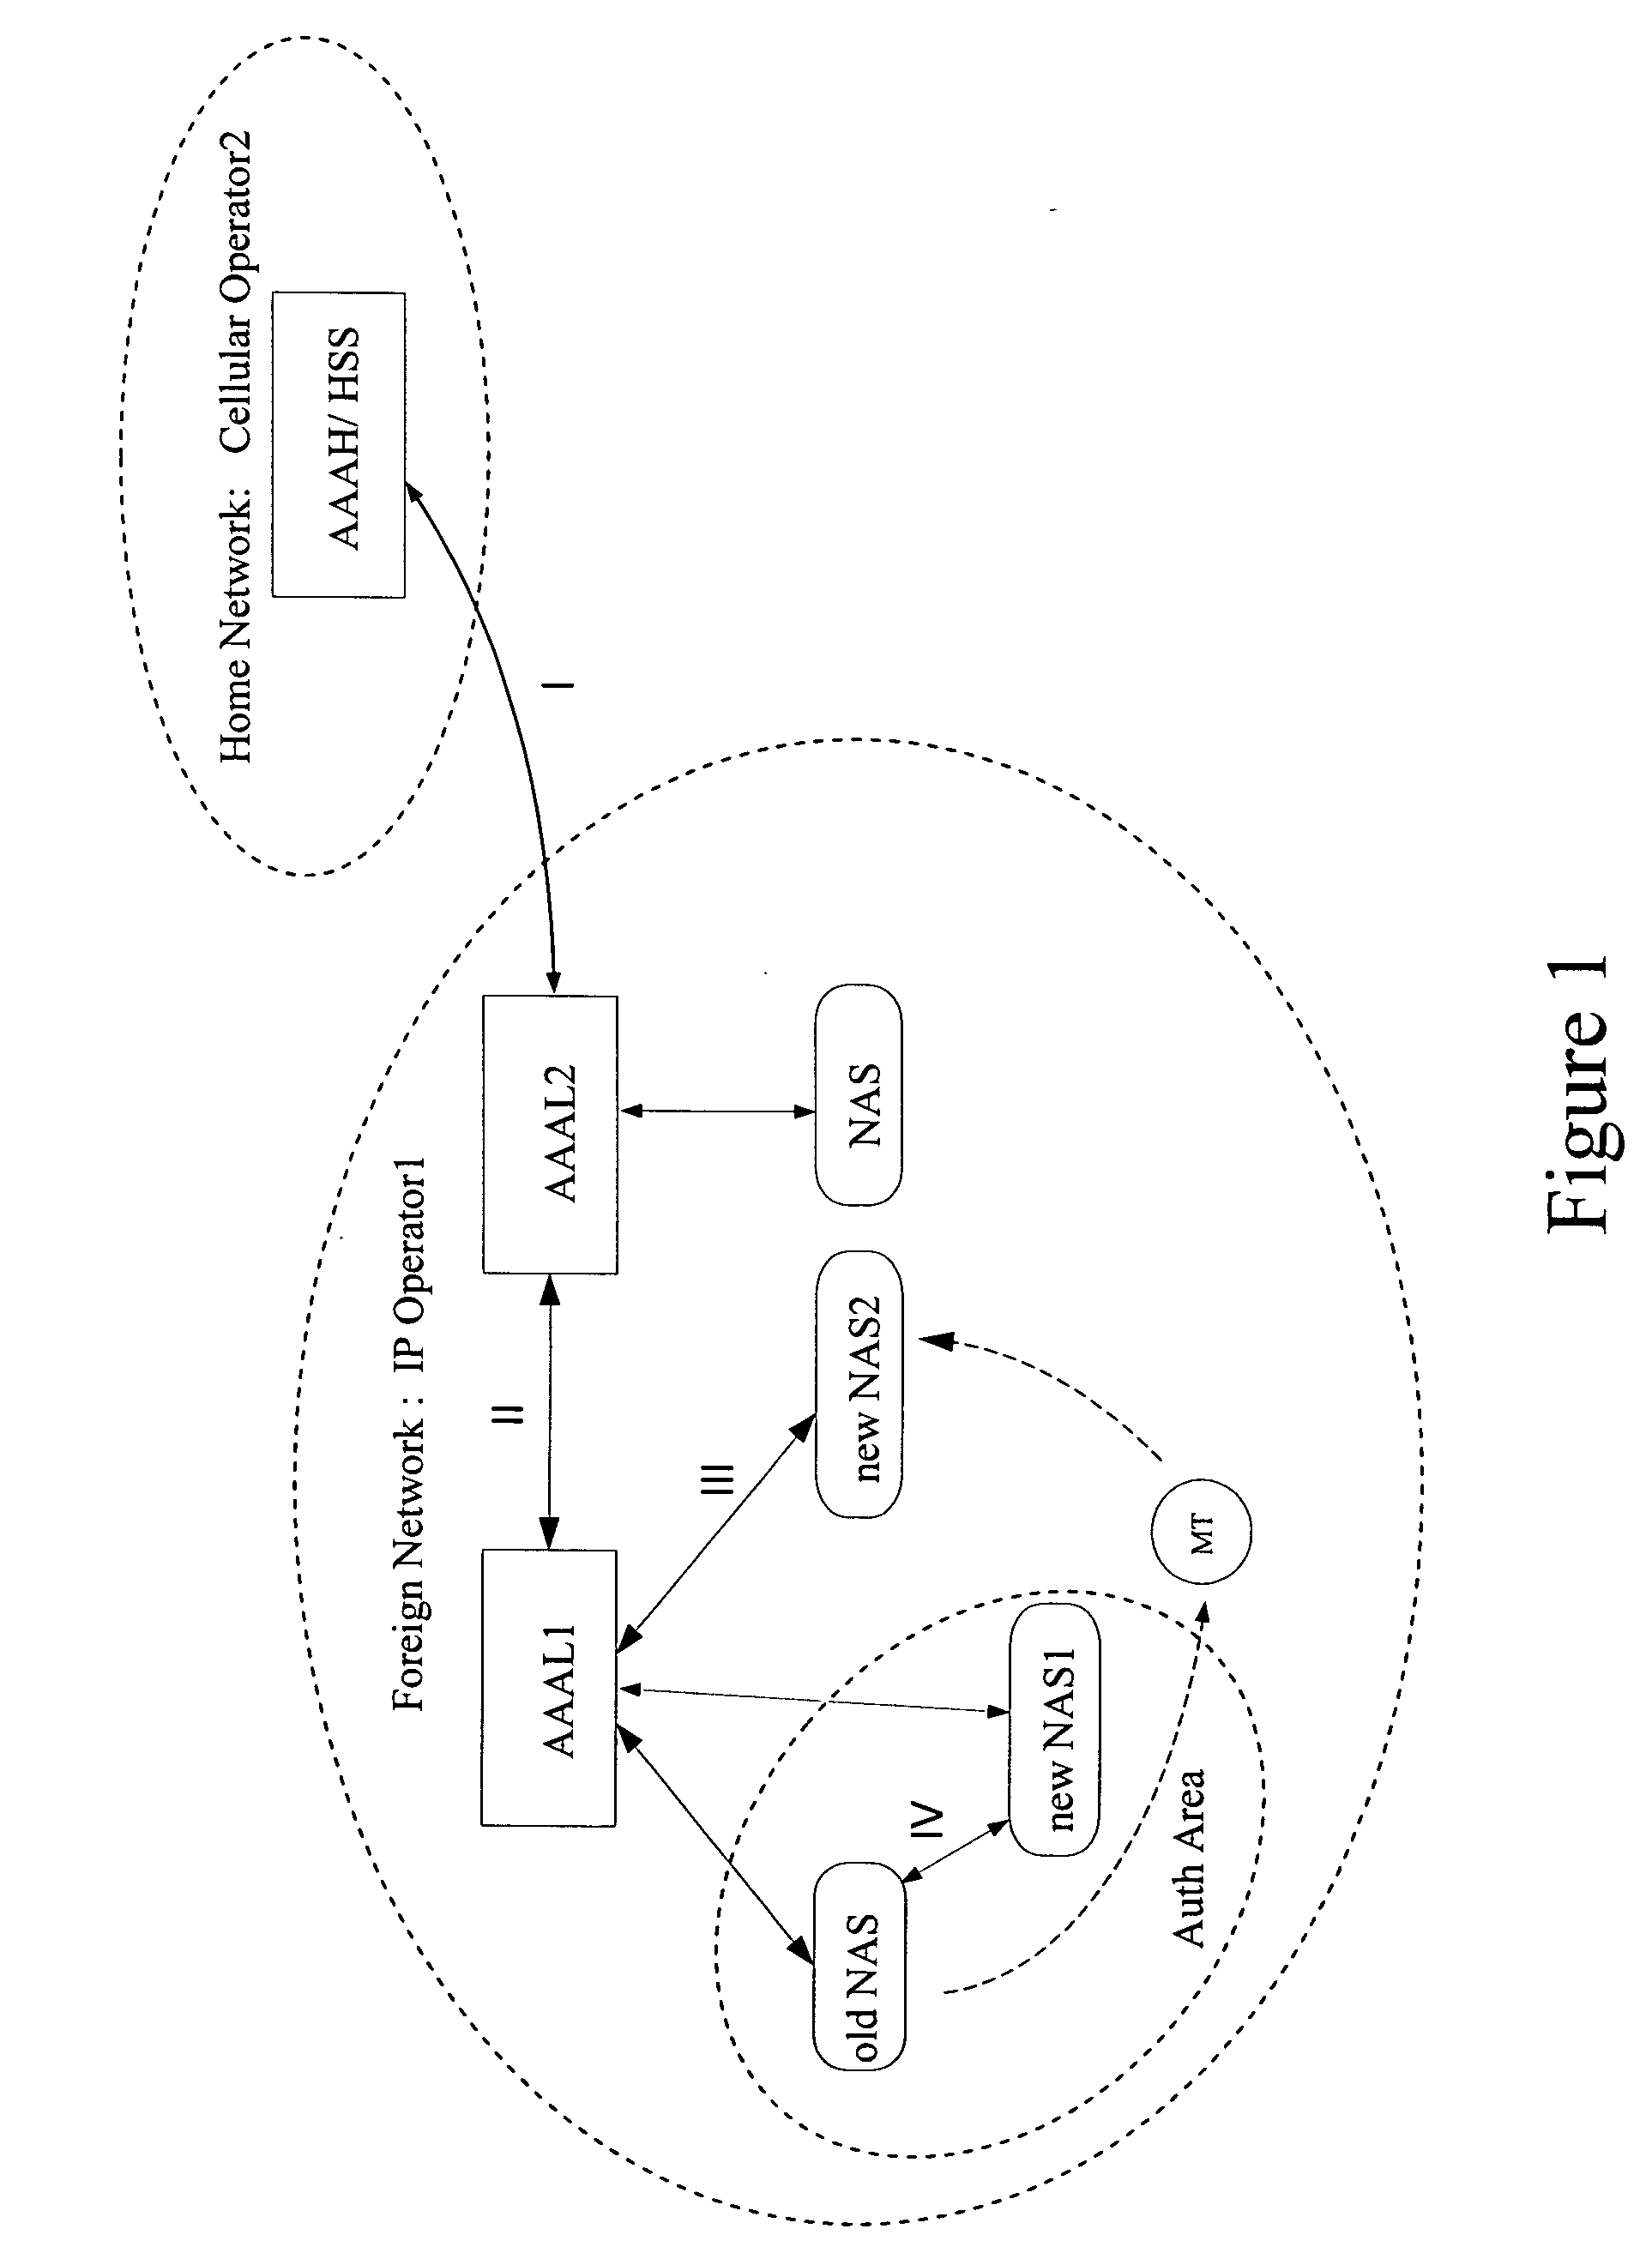 Authentication and authorization in heterogeneous networks